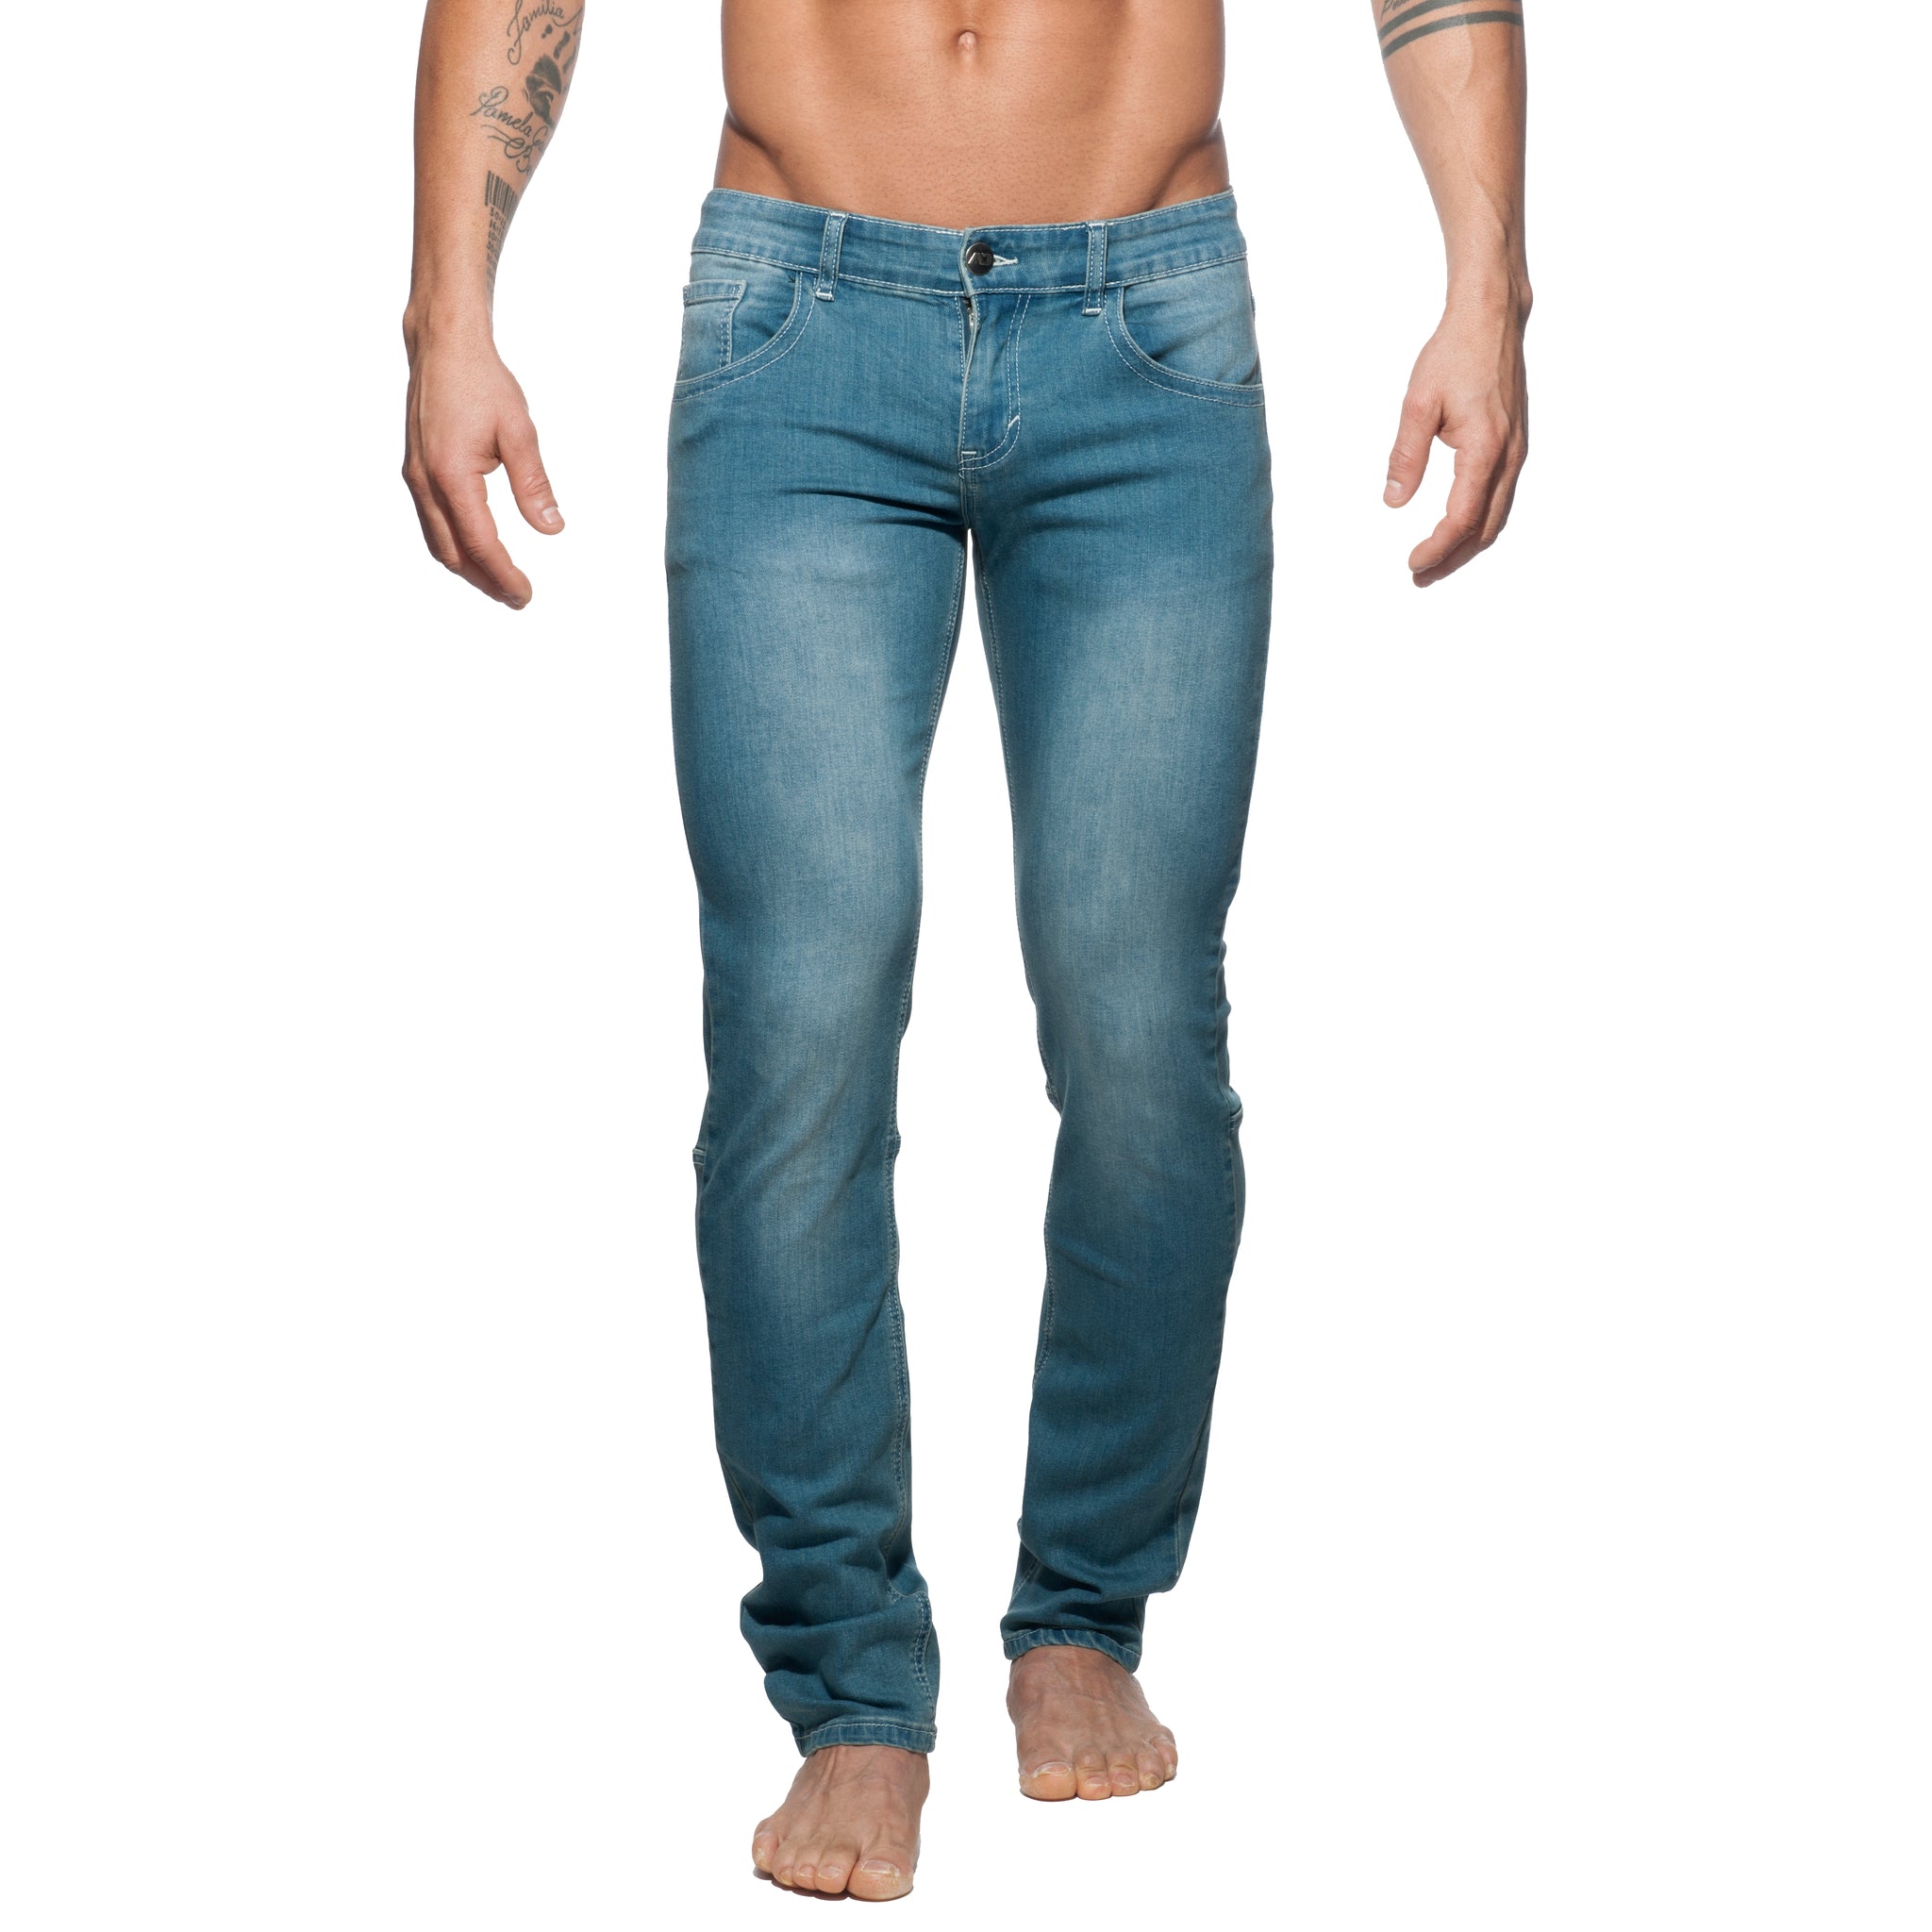 Addicted Basic Jeans Blue Jeans AD636